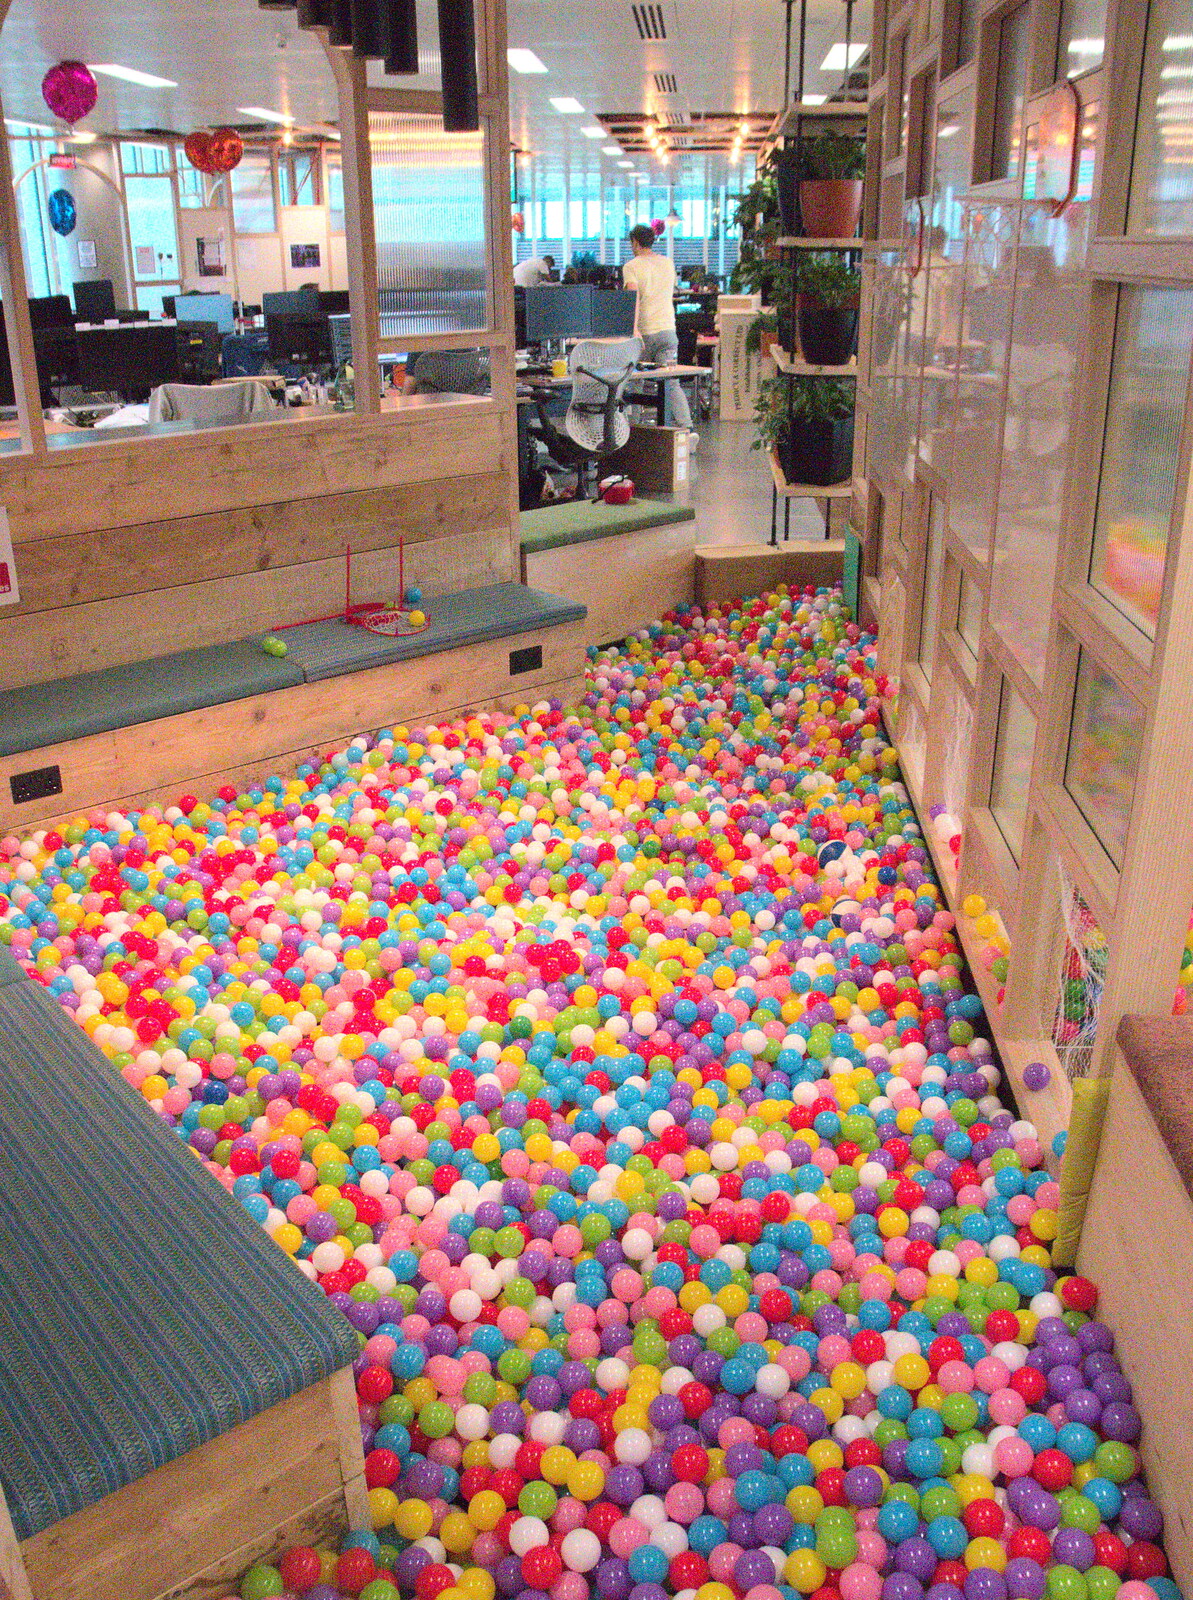 A 'sunken lounge' has been turned into a ball pit from A SwiftKey Innovation Week, Paddington, London - 27th July 2017